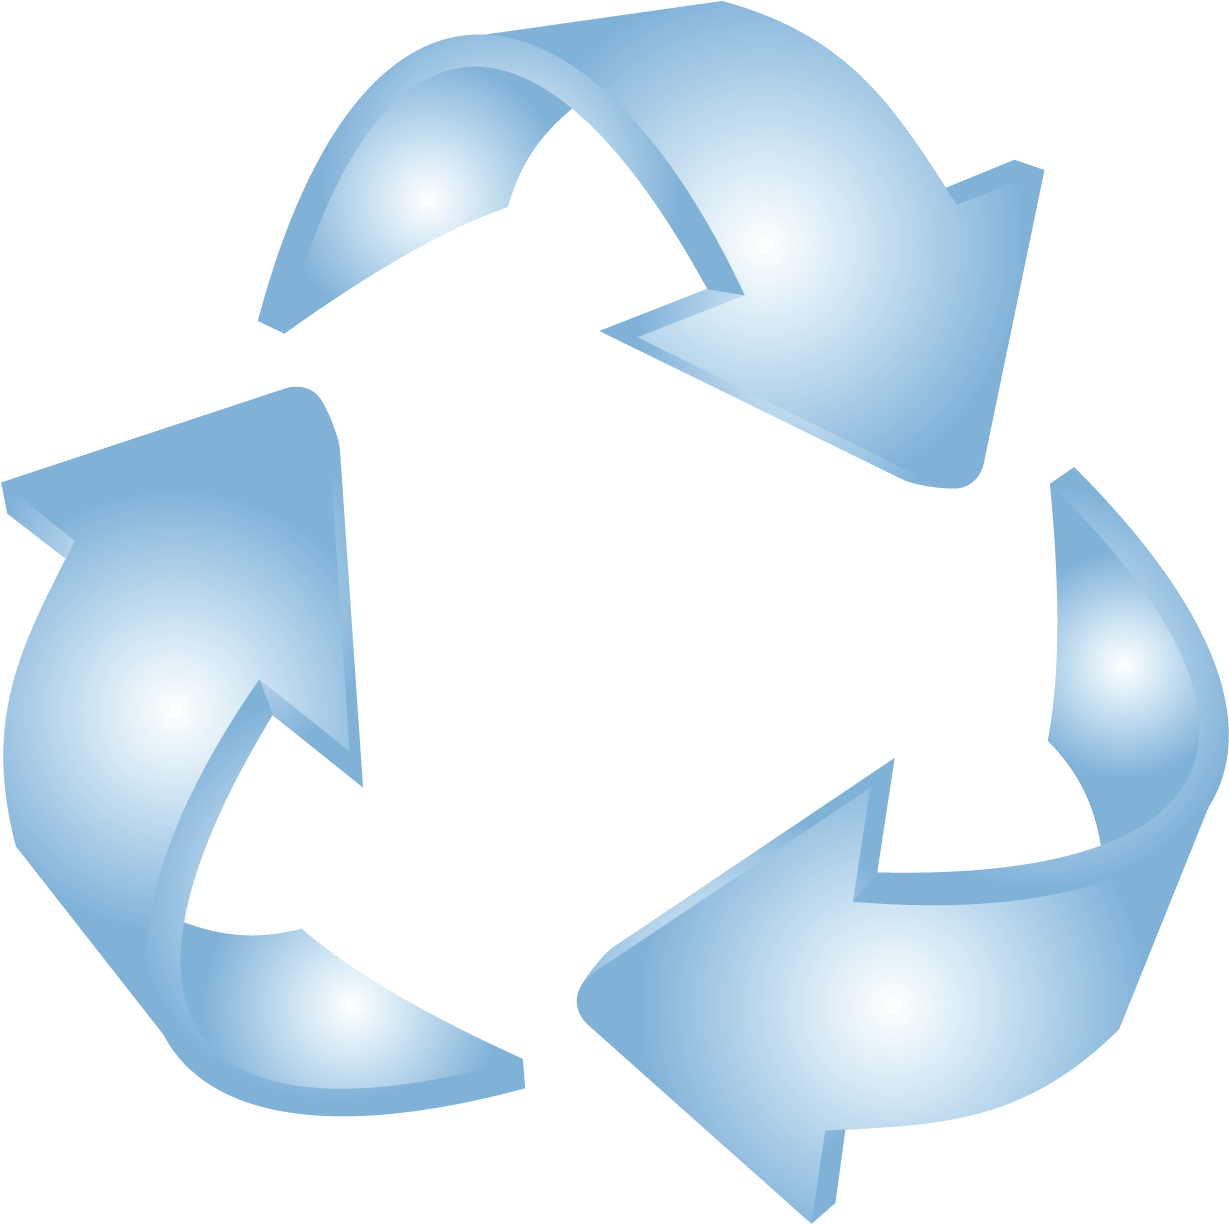 Recycling Symbol Blue PNG image